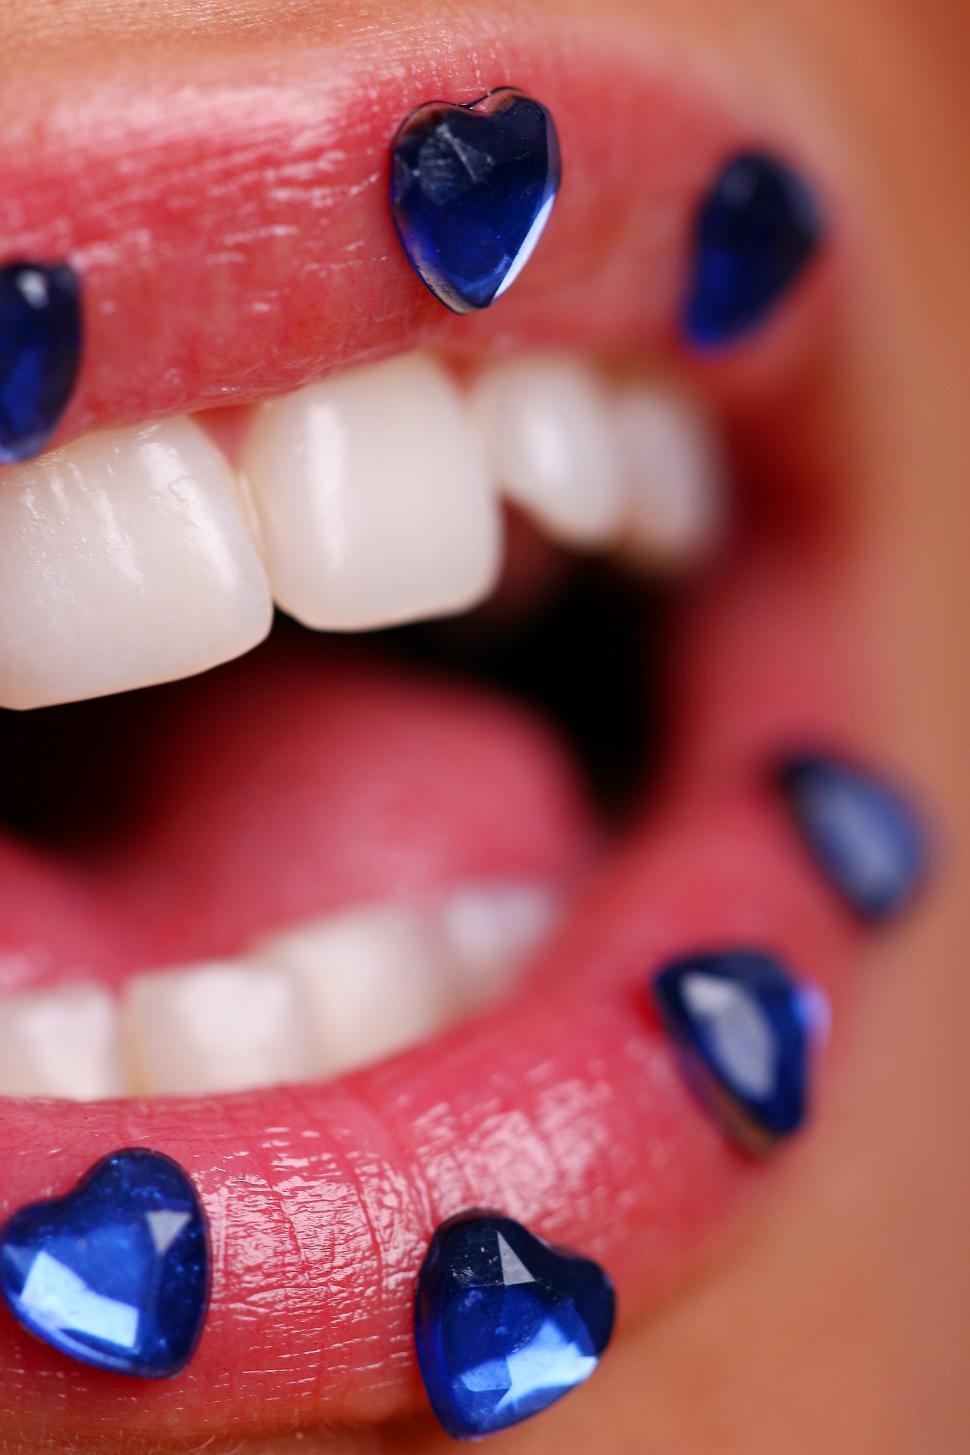 Free Image of Mouth with colored glass hearts 